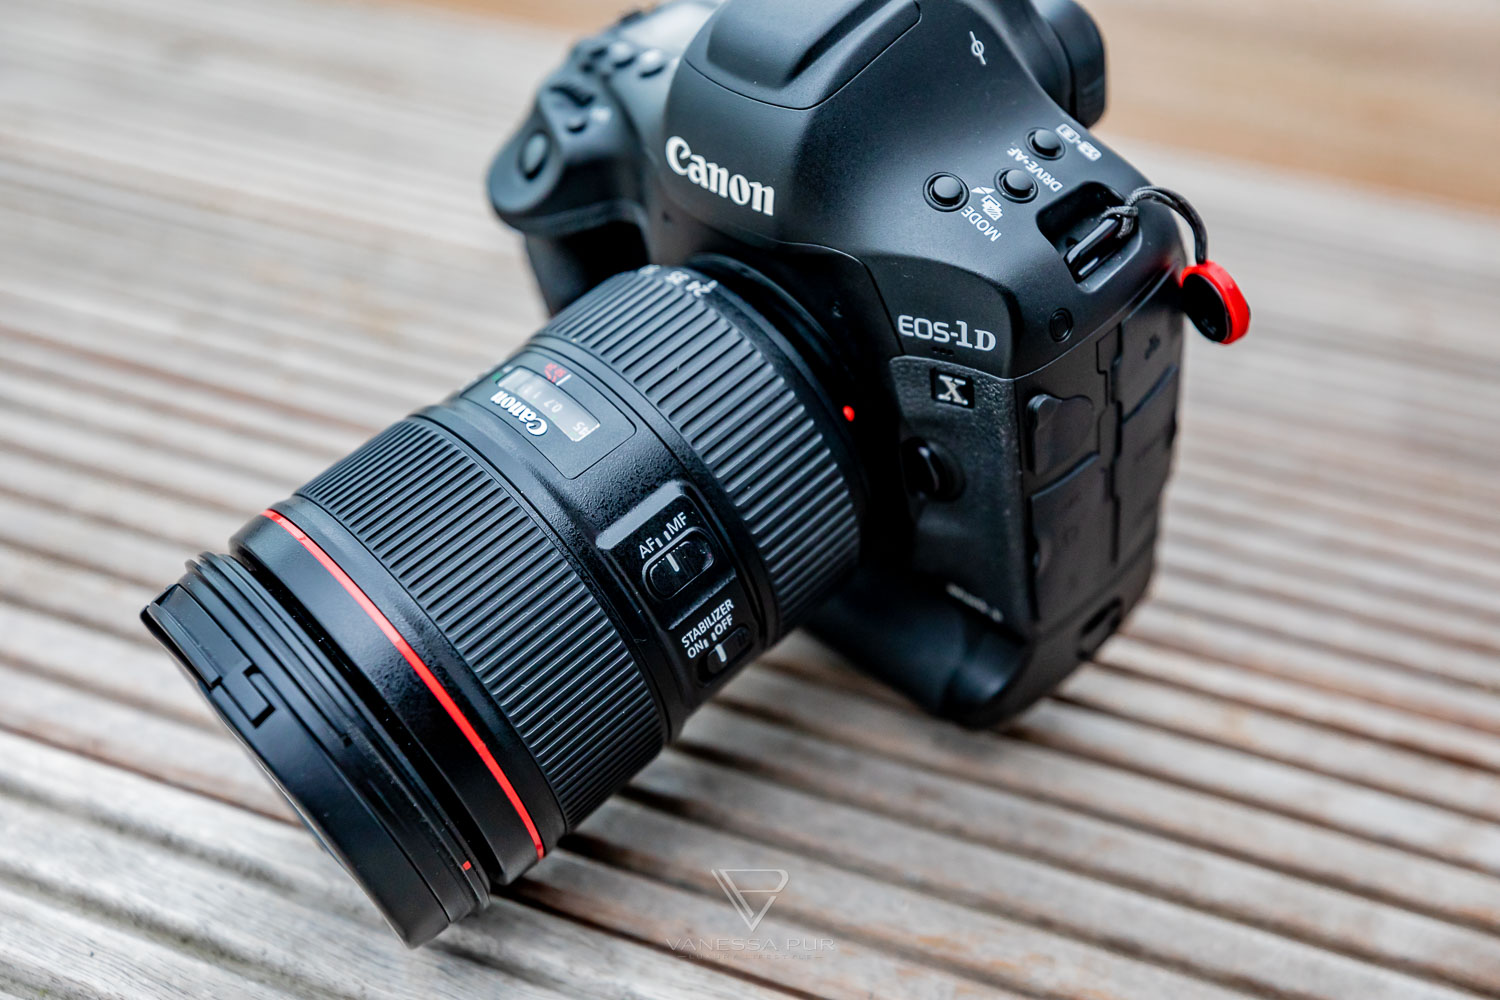 Canon EF 24-105mm f/4L IS II USM lens - review and experience - Canon EF 24-105mm f/4L IS II USM lens on Canon EOS 1Dx Mark II - Photoblog - Review - Rating - Field Report - How good is the lens?